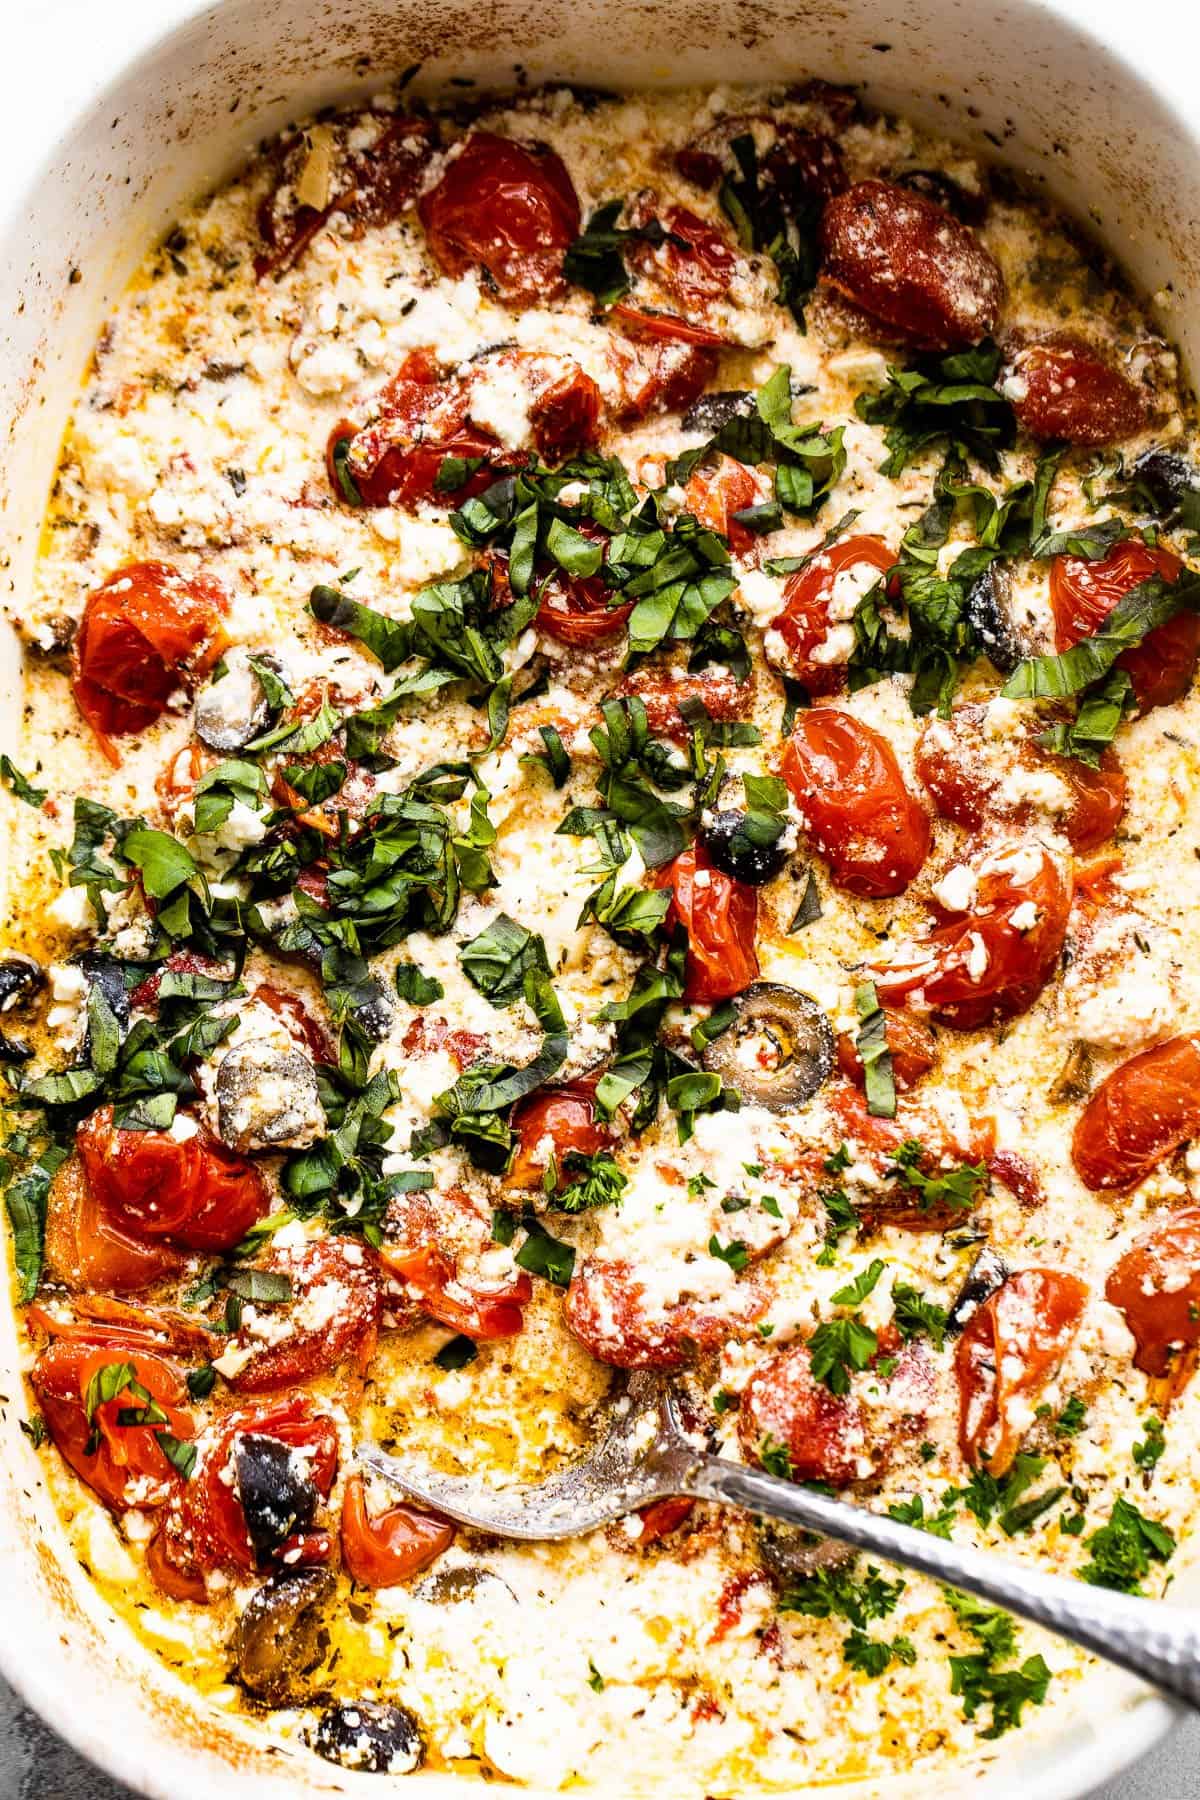 baked feta cheese with baked tomatoes, olives, and herbs